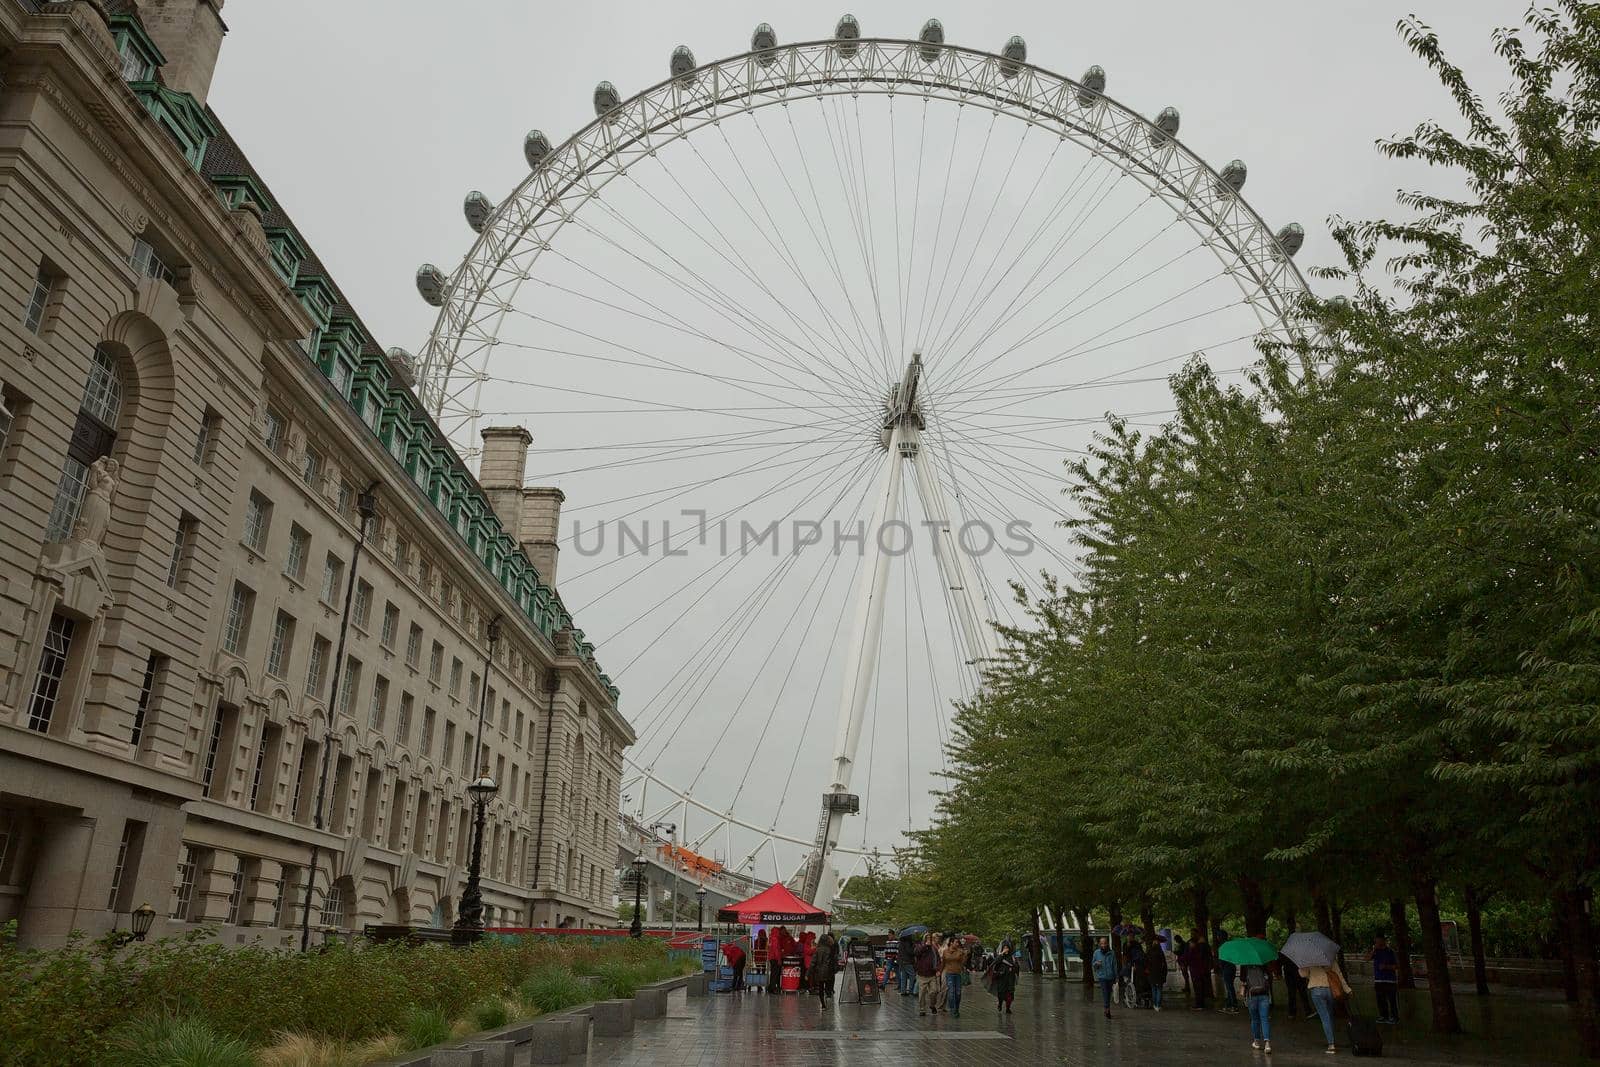 LONDON, UK - SEPTEMBER 08, 2017: View of the London Eye wheel and South Bank of the River Thames from Westminster bridge, London, UK